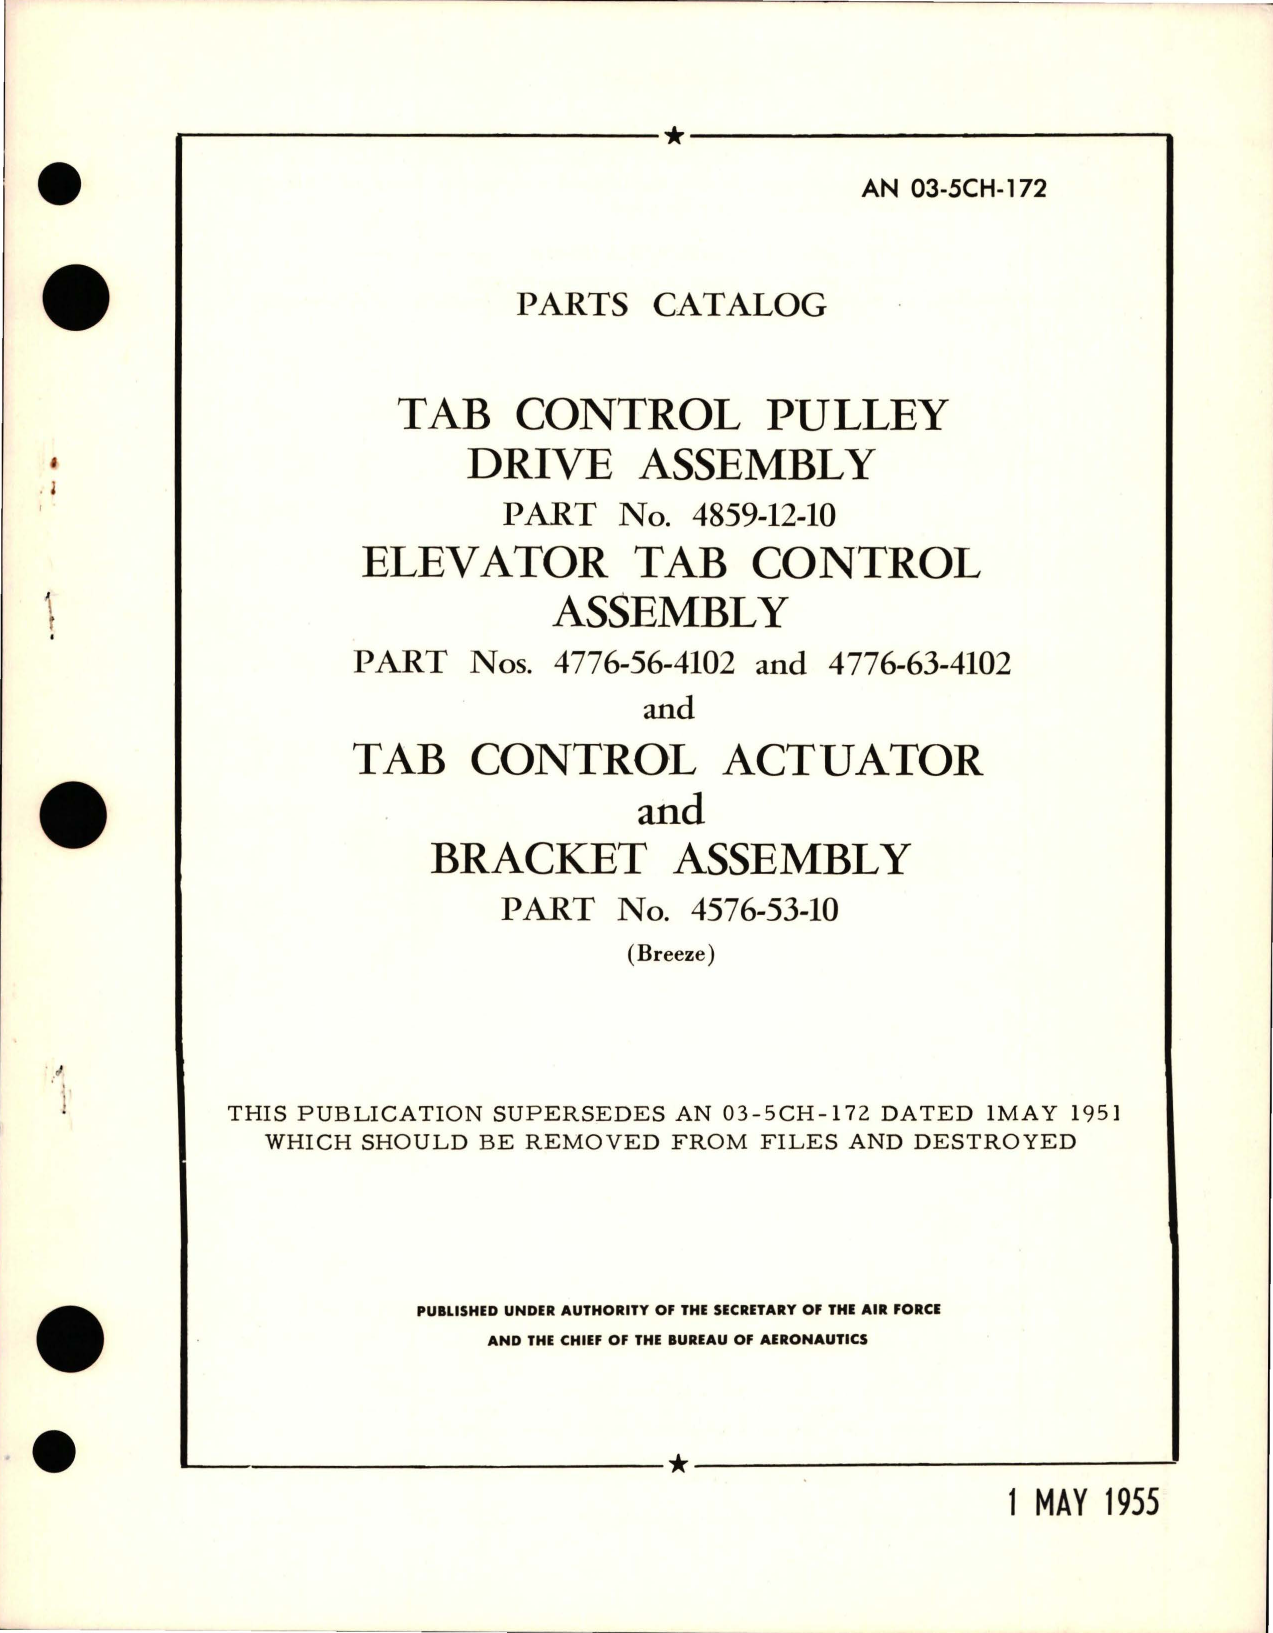 Sample page 1 from AirCorps Library document: Parts Catalog for Tab Control Pulley Drive Assembly, Elevator Tab Control Assembly, Tab Control Actuator, and Bracket Assembly 